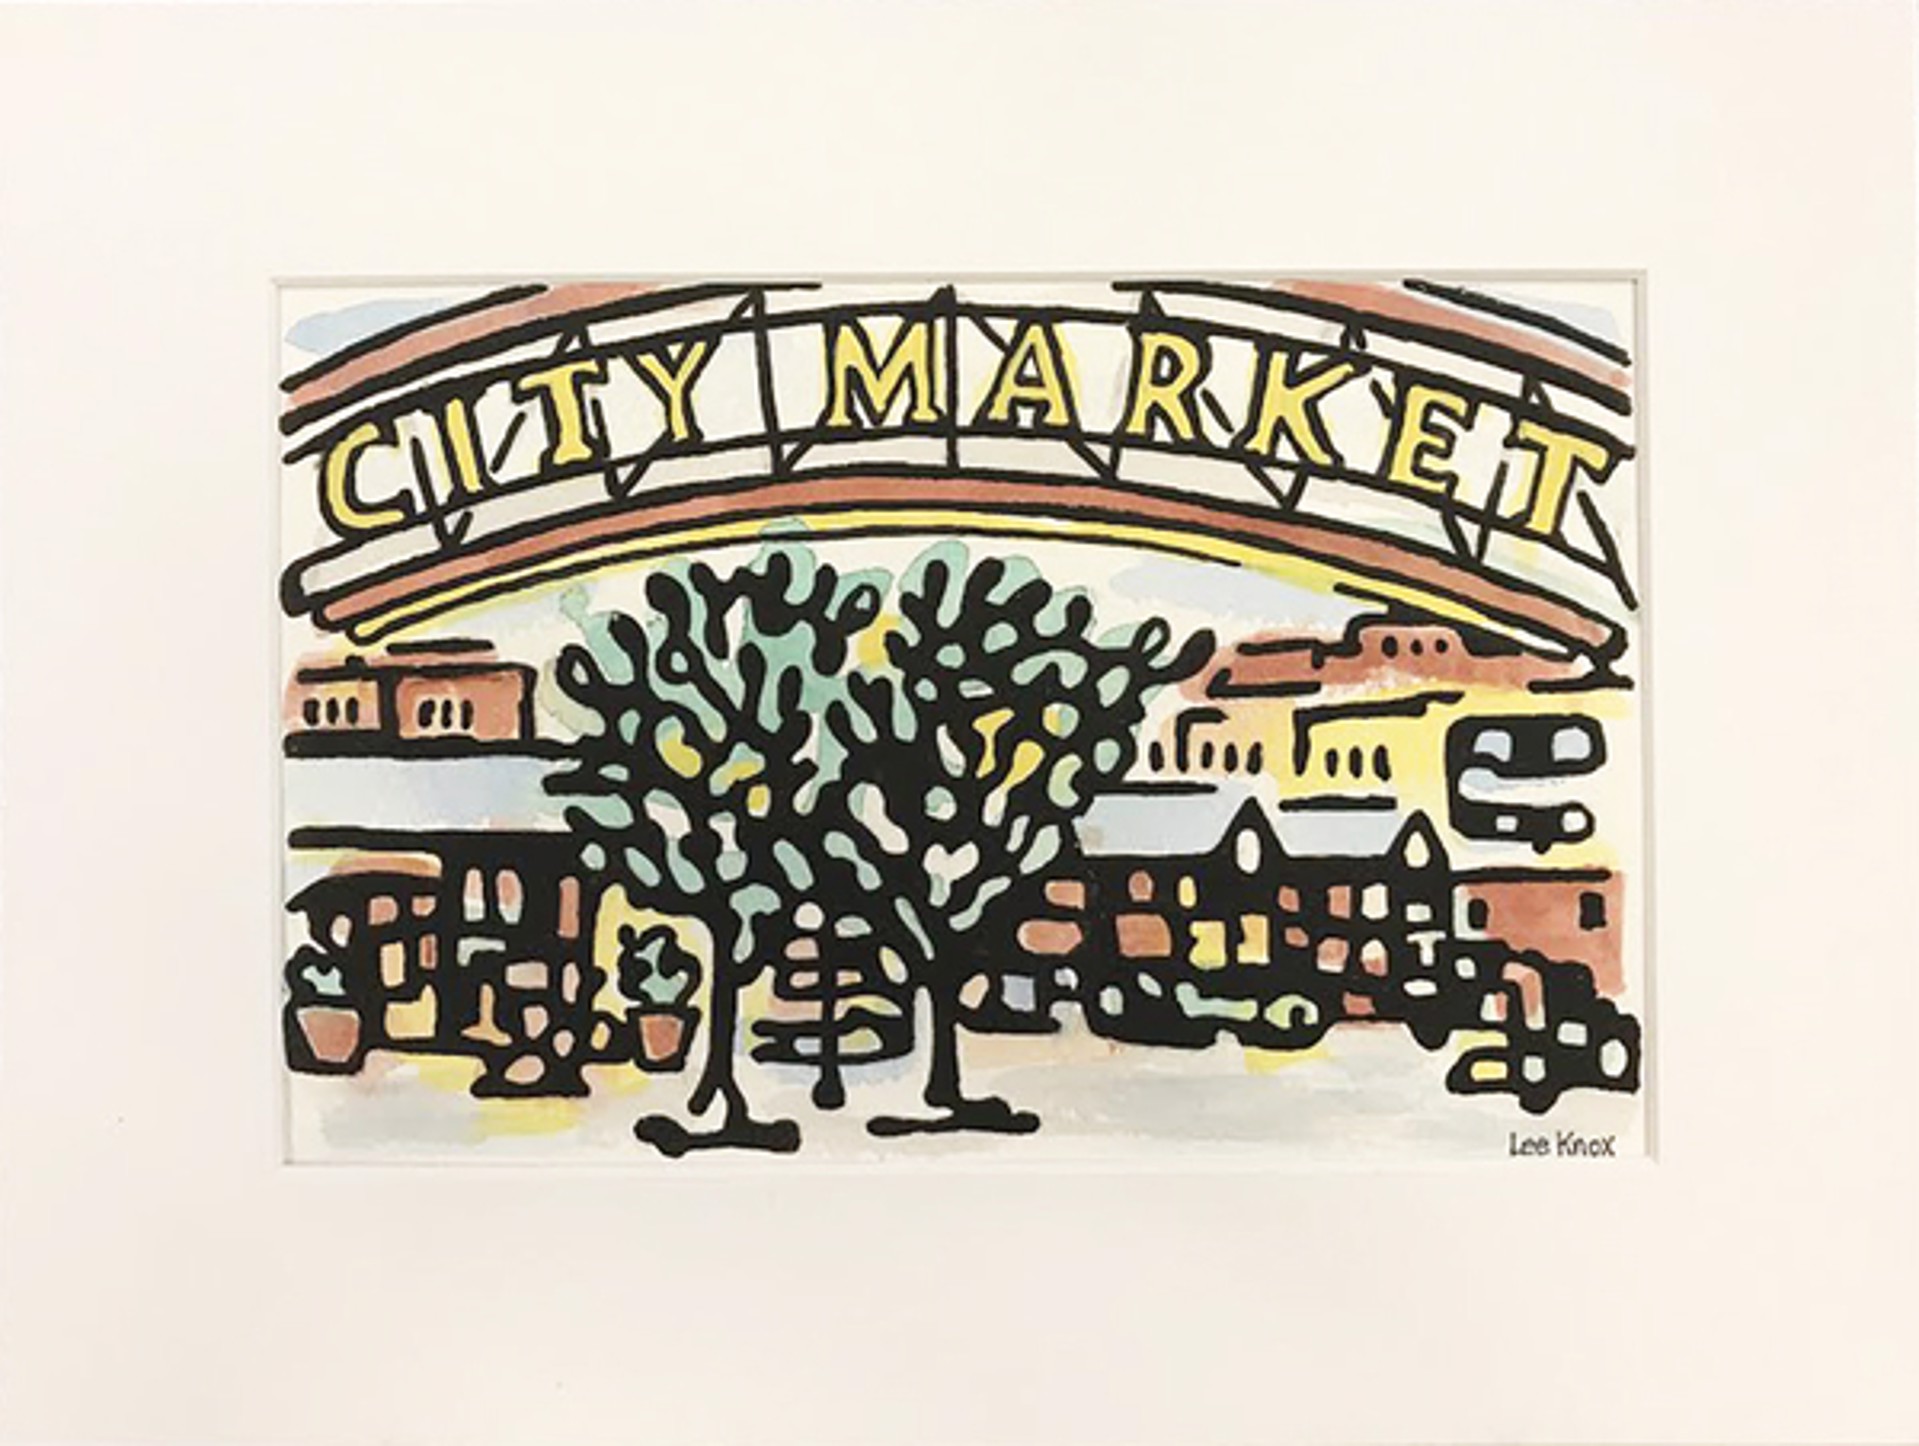 City Market by Lee Knox